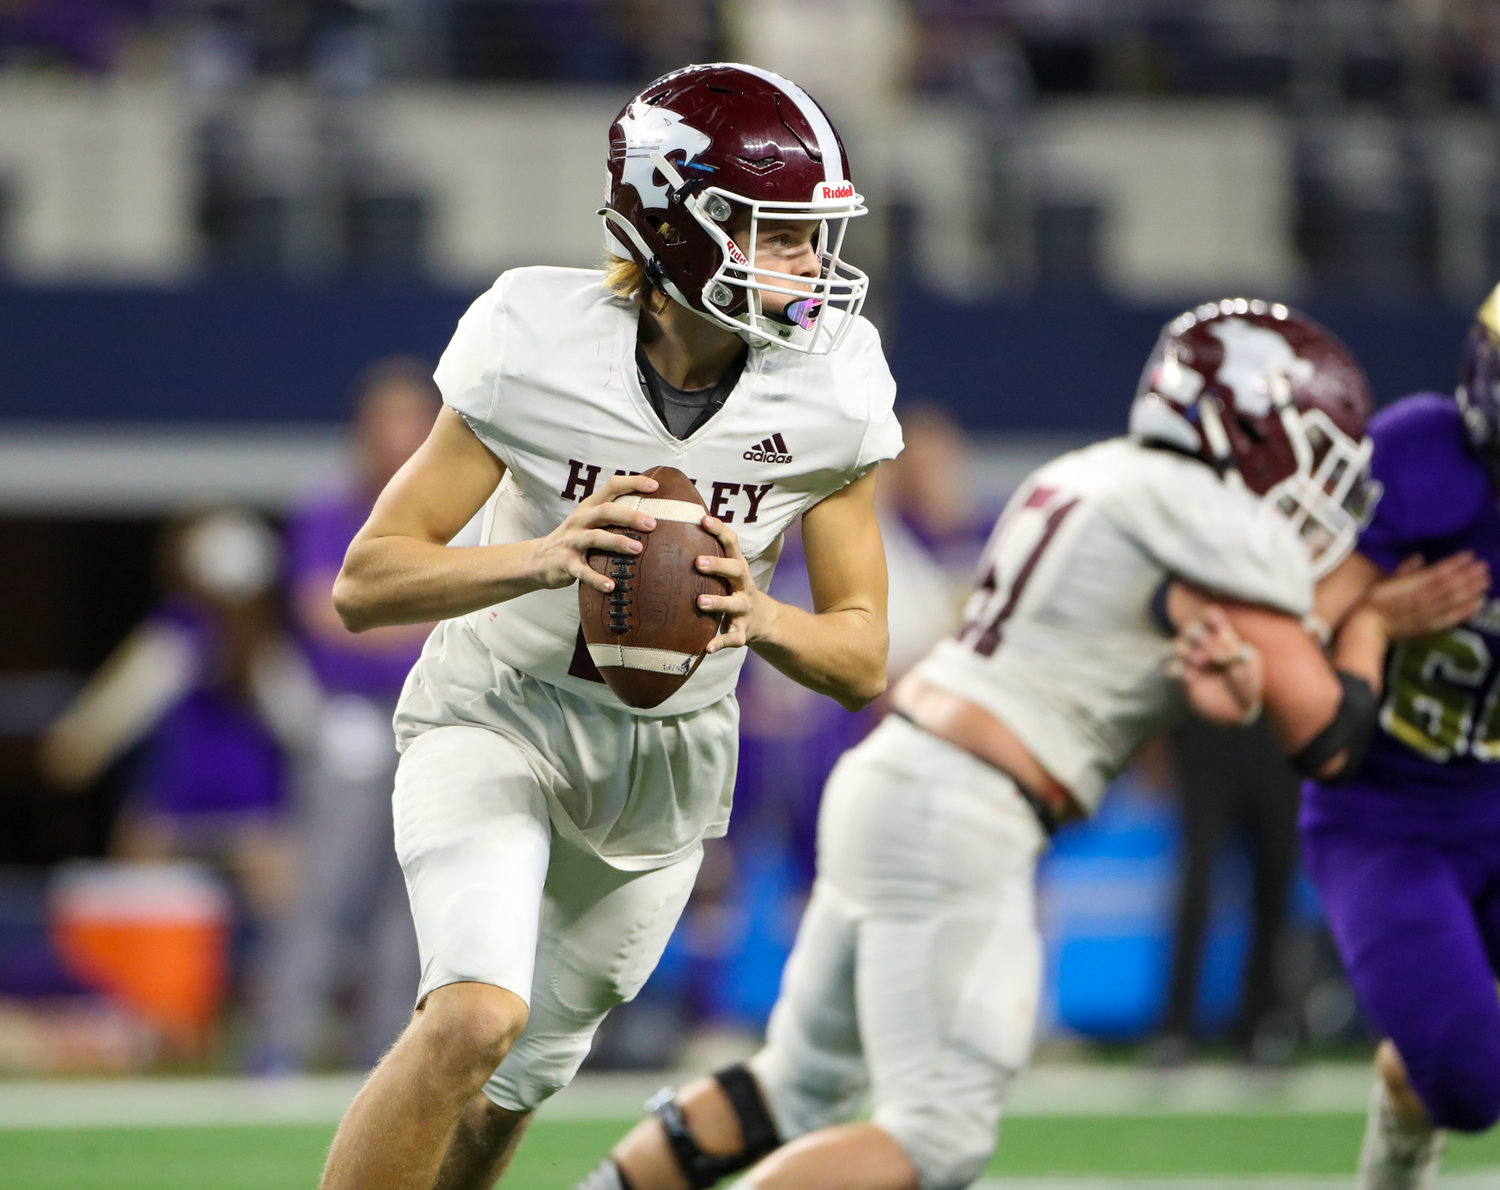 Hawley Bearcats junior Rodey Hooper (2) rolls out looking to pass during the Class 2A Division I state football championship game between Shiner and Hawley on December 15, 2021 in Arlington, Texas.